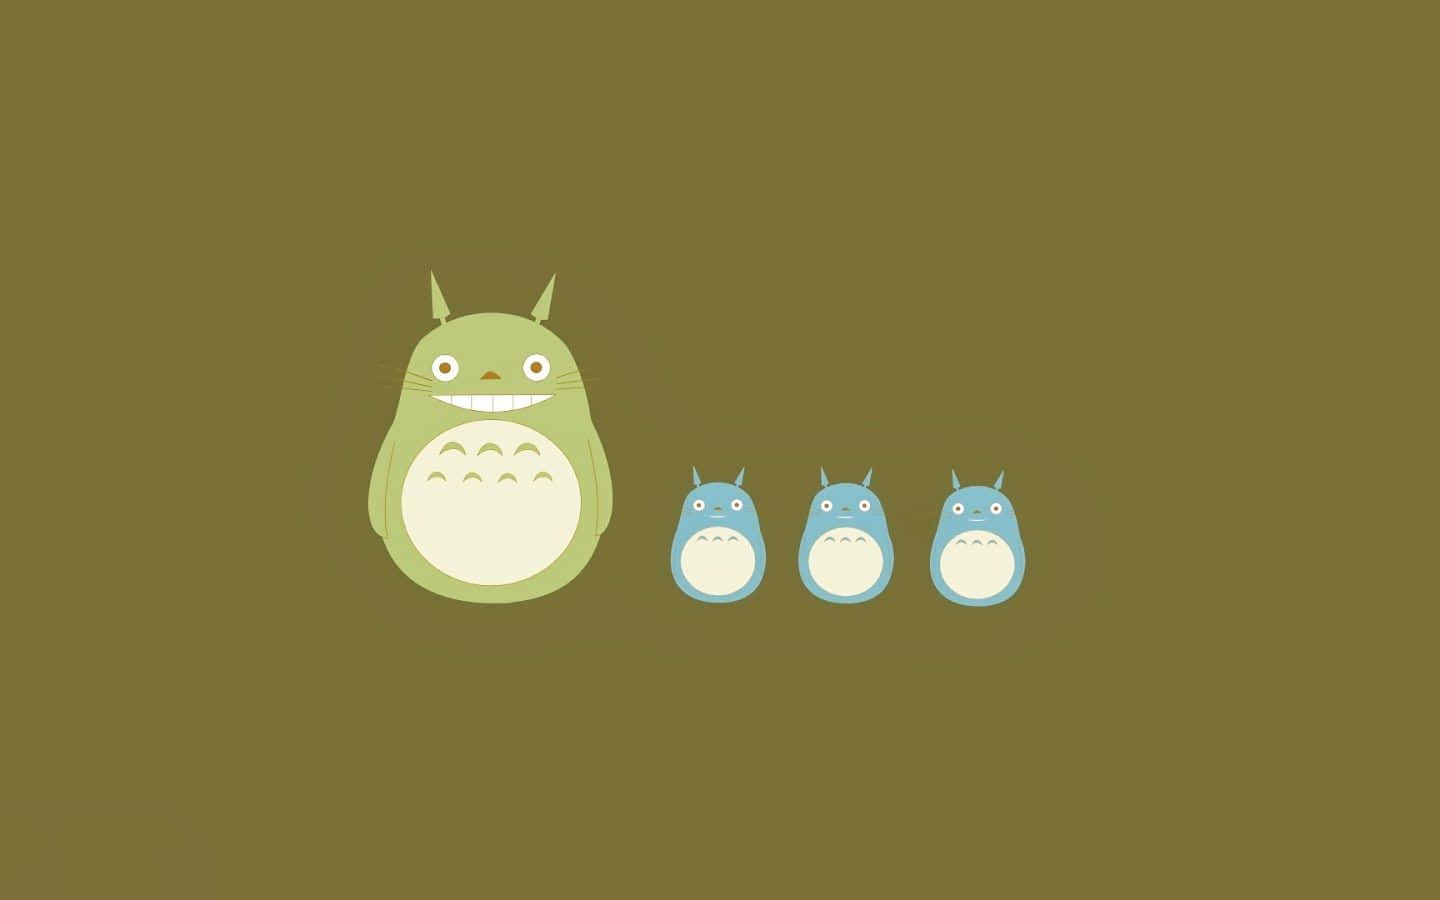 The loveable character Totoro